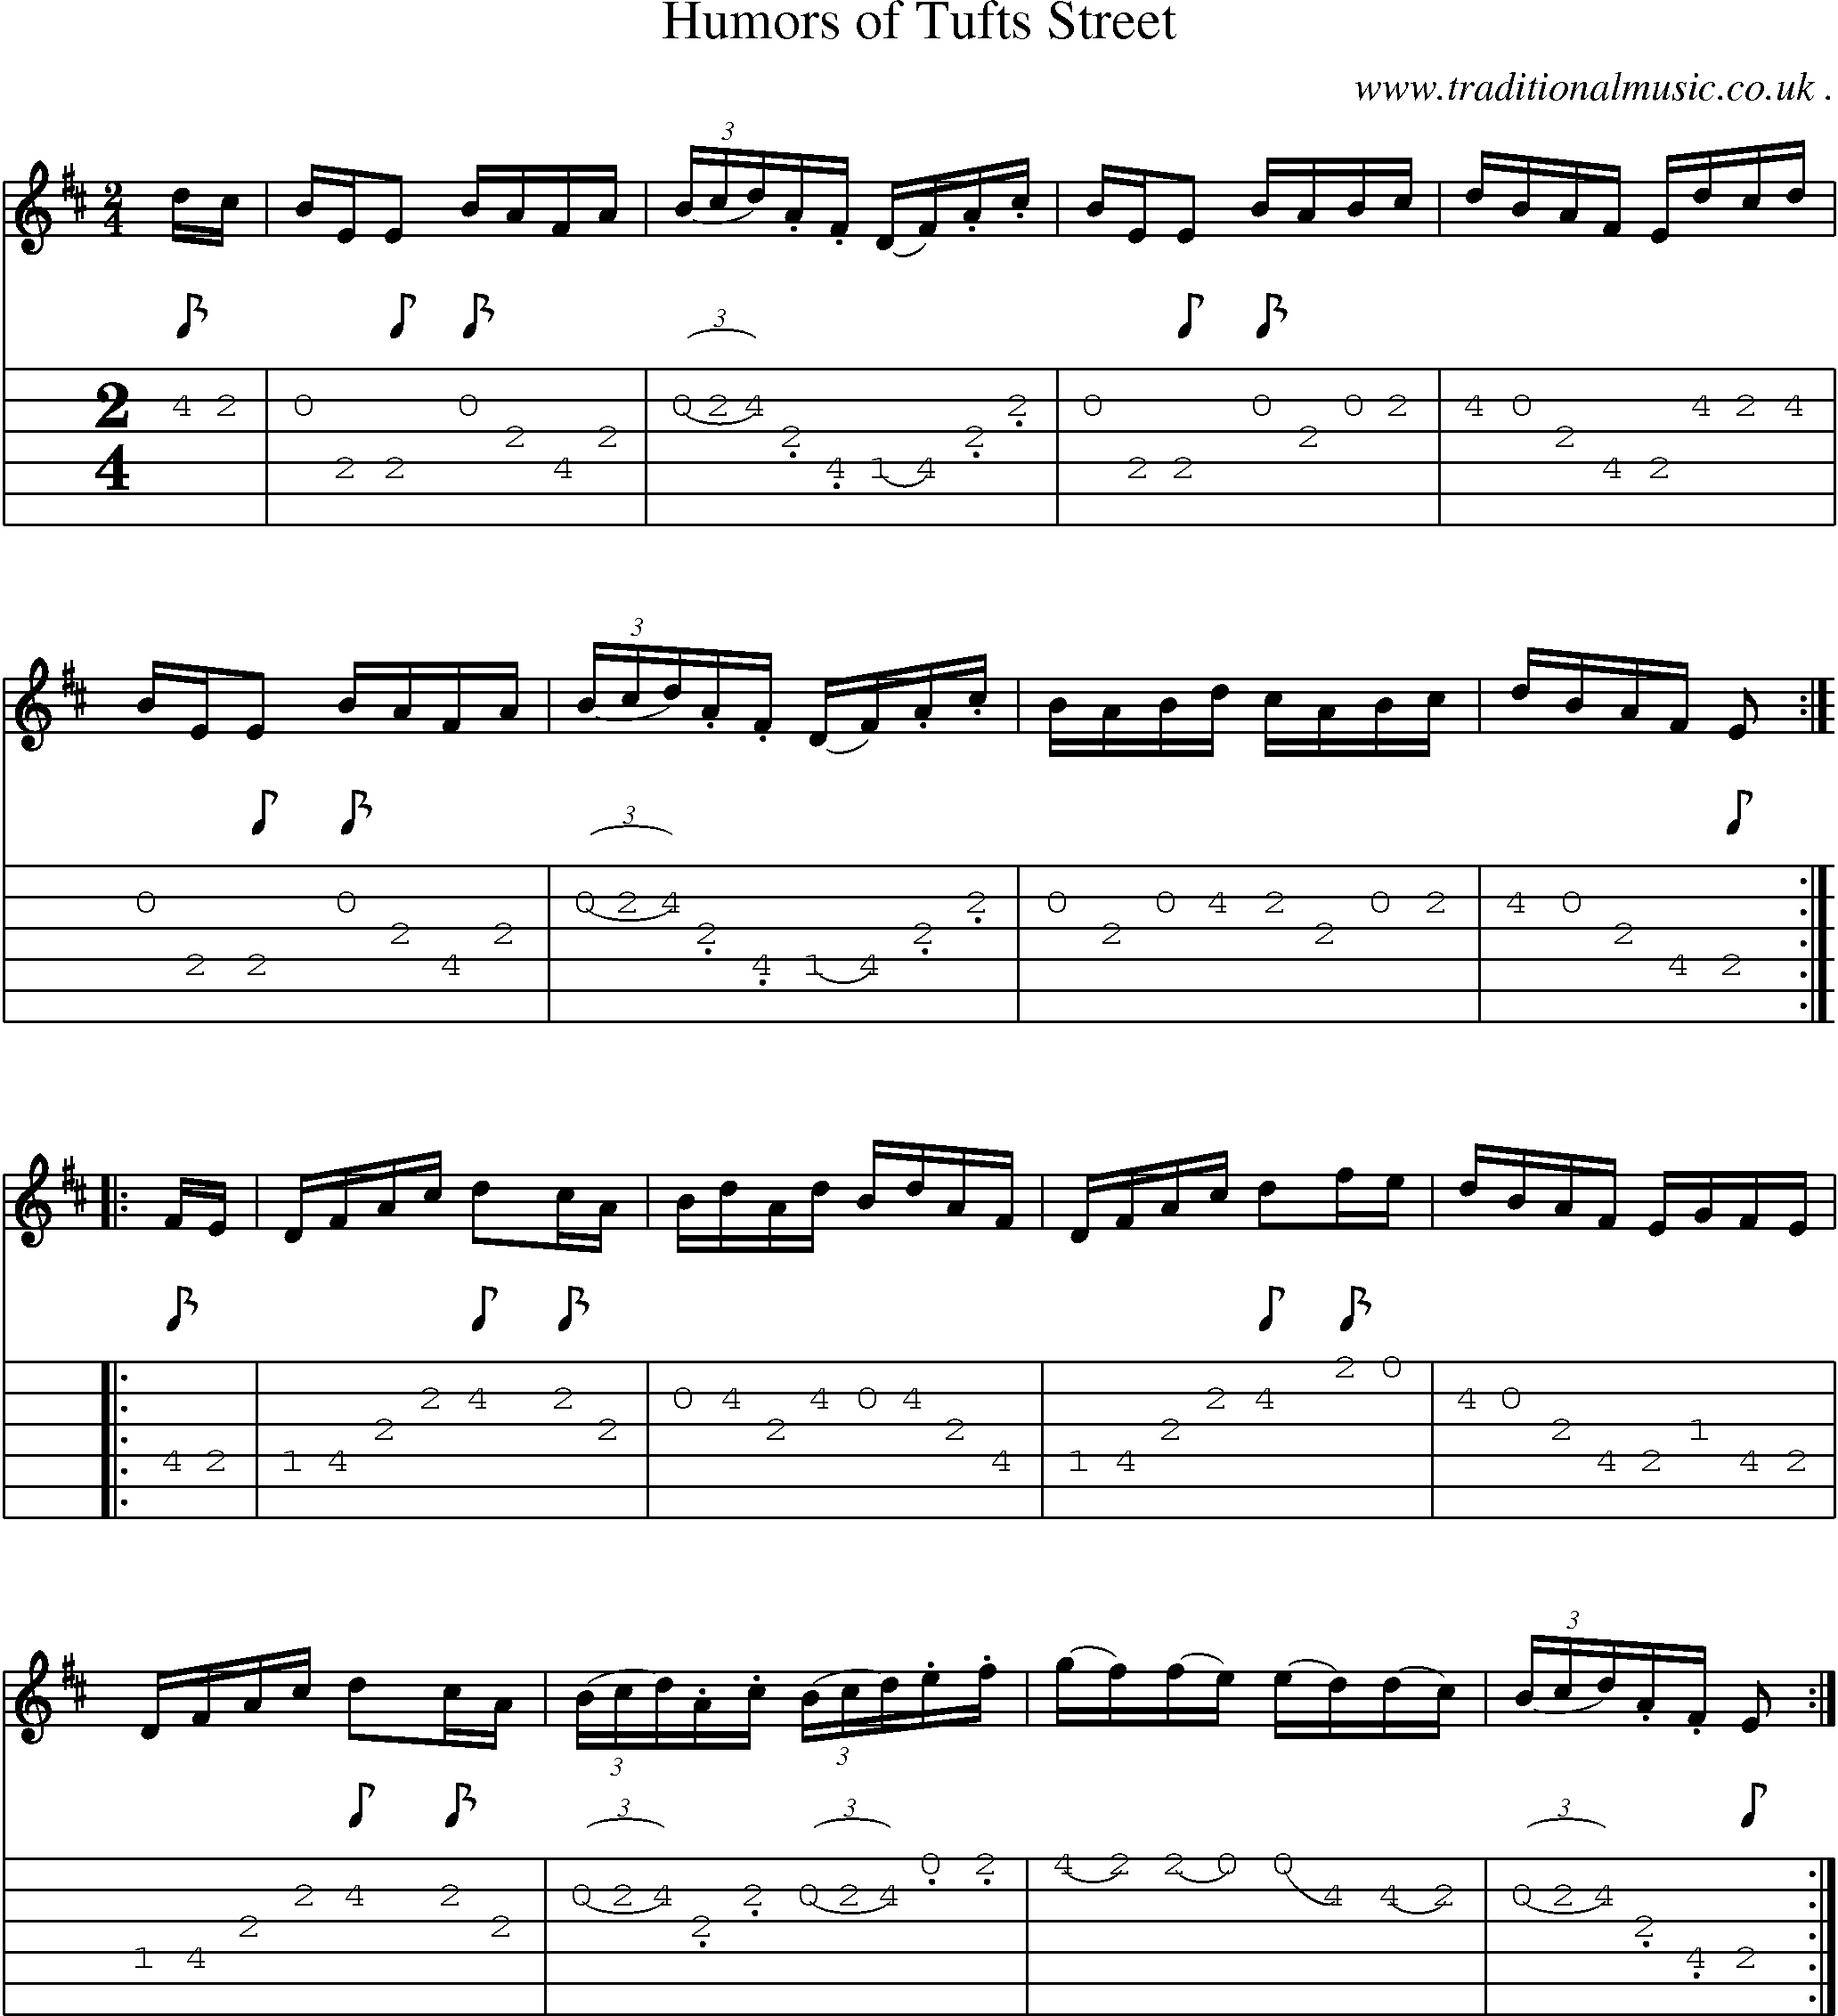 Sheet-Music and Guitar Tabs for Humors Of Tufts Street